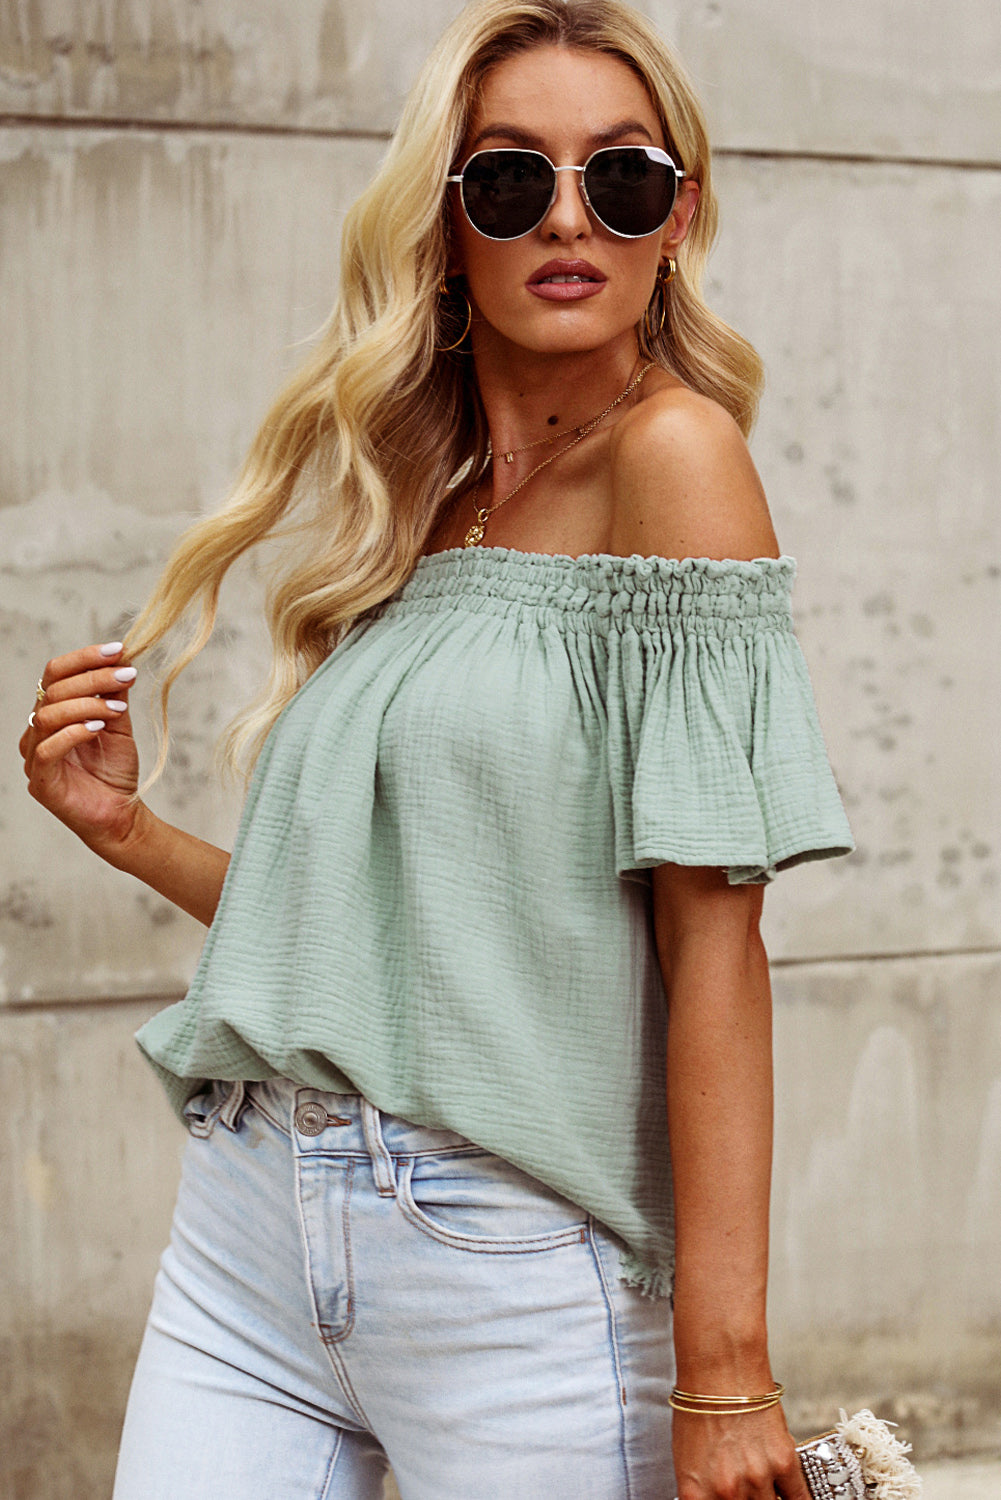 Green Off Shoulder Textured Ruched Ruffle Blouse